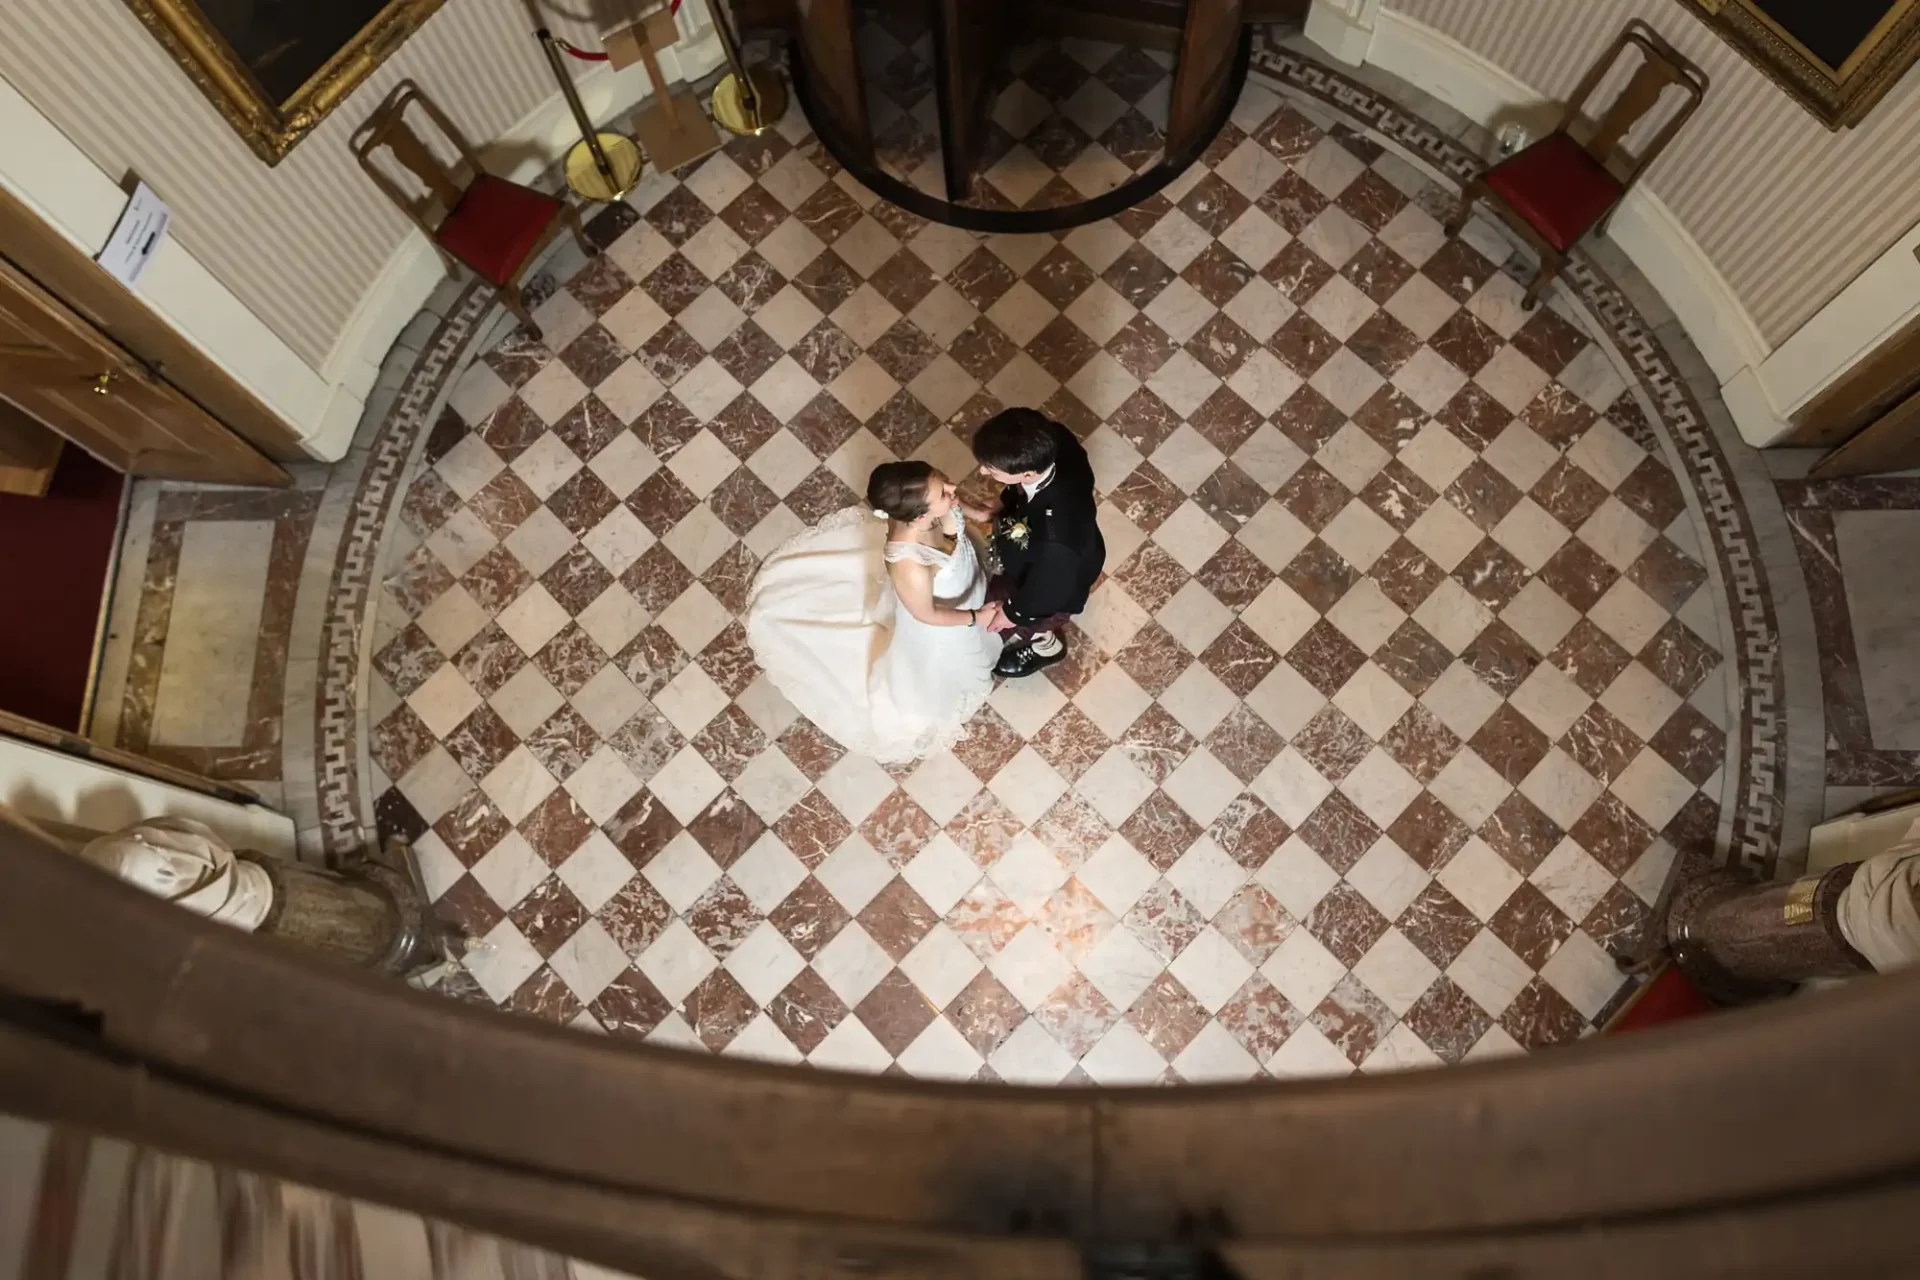 Aerial view of a bride and groom sitting on the floor, holding hands in a circular room with checkered flooring.